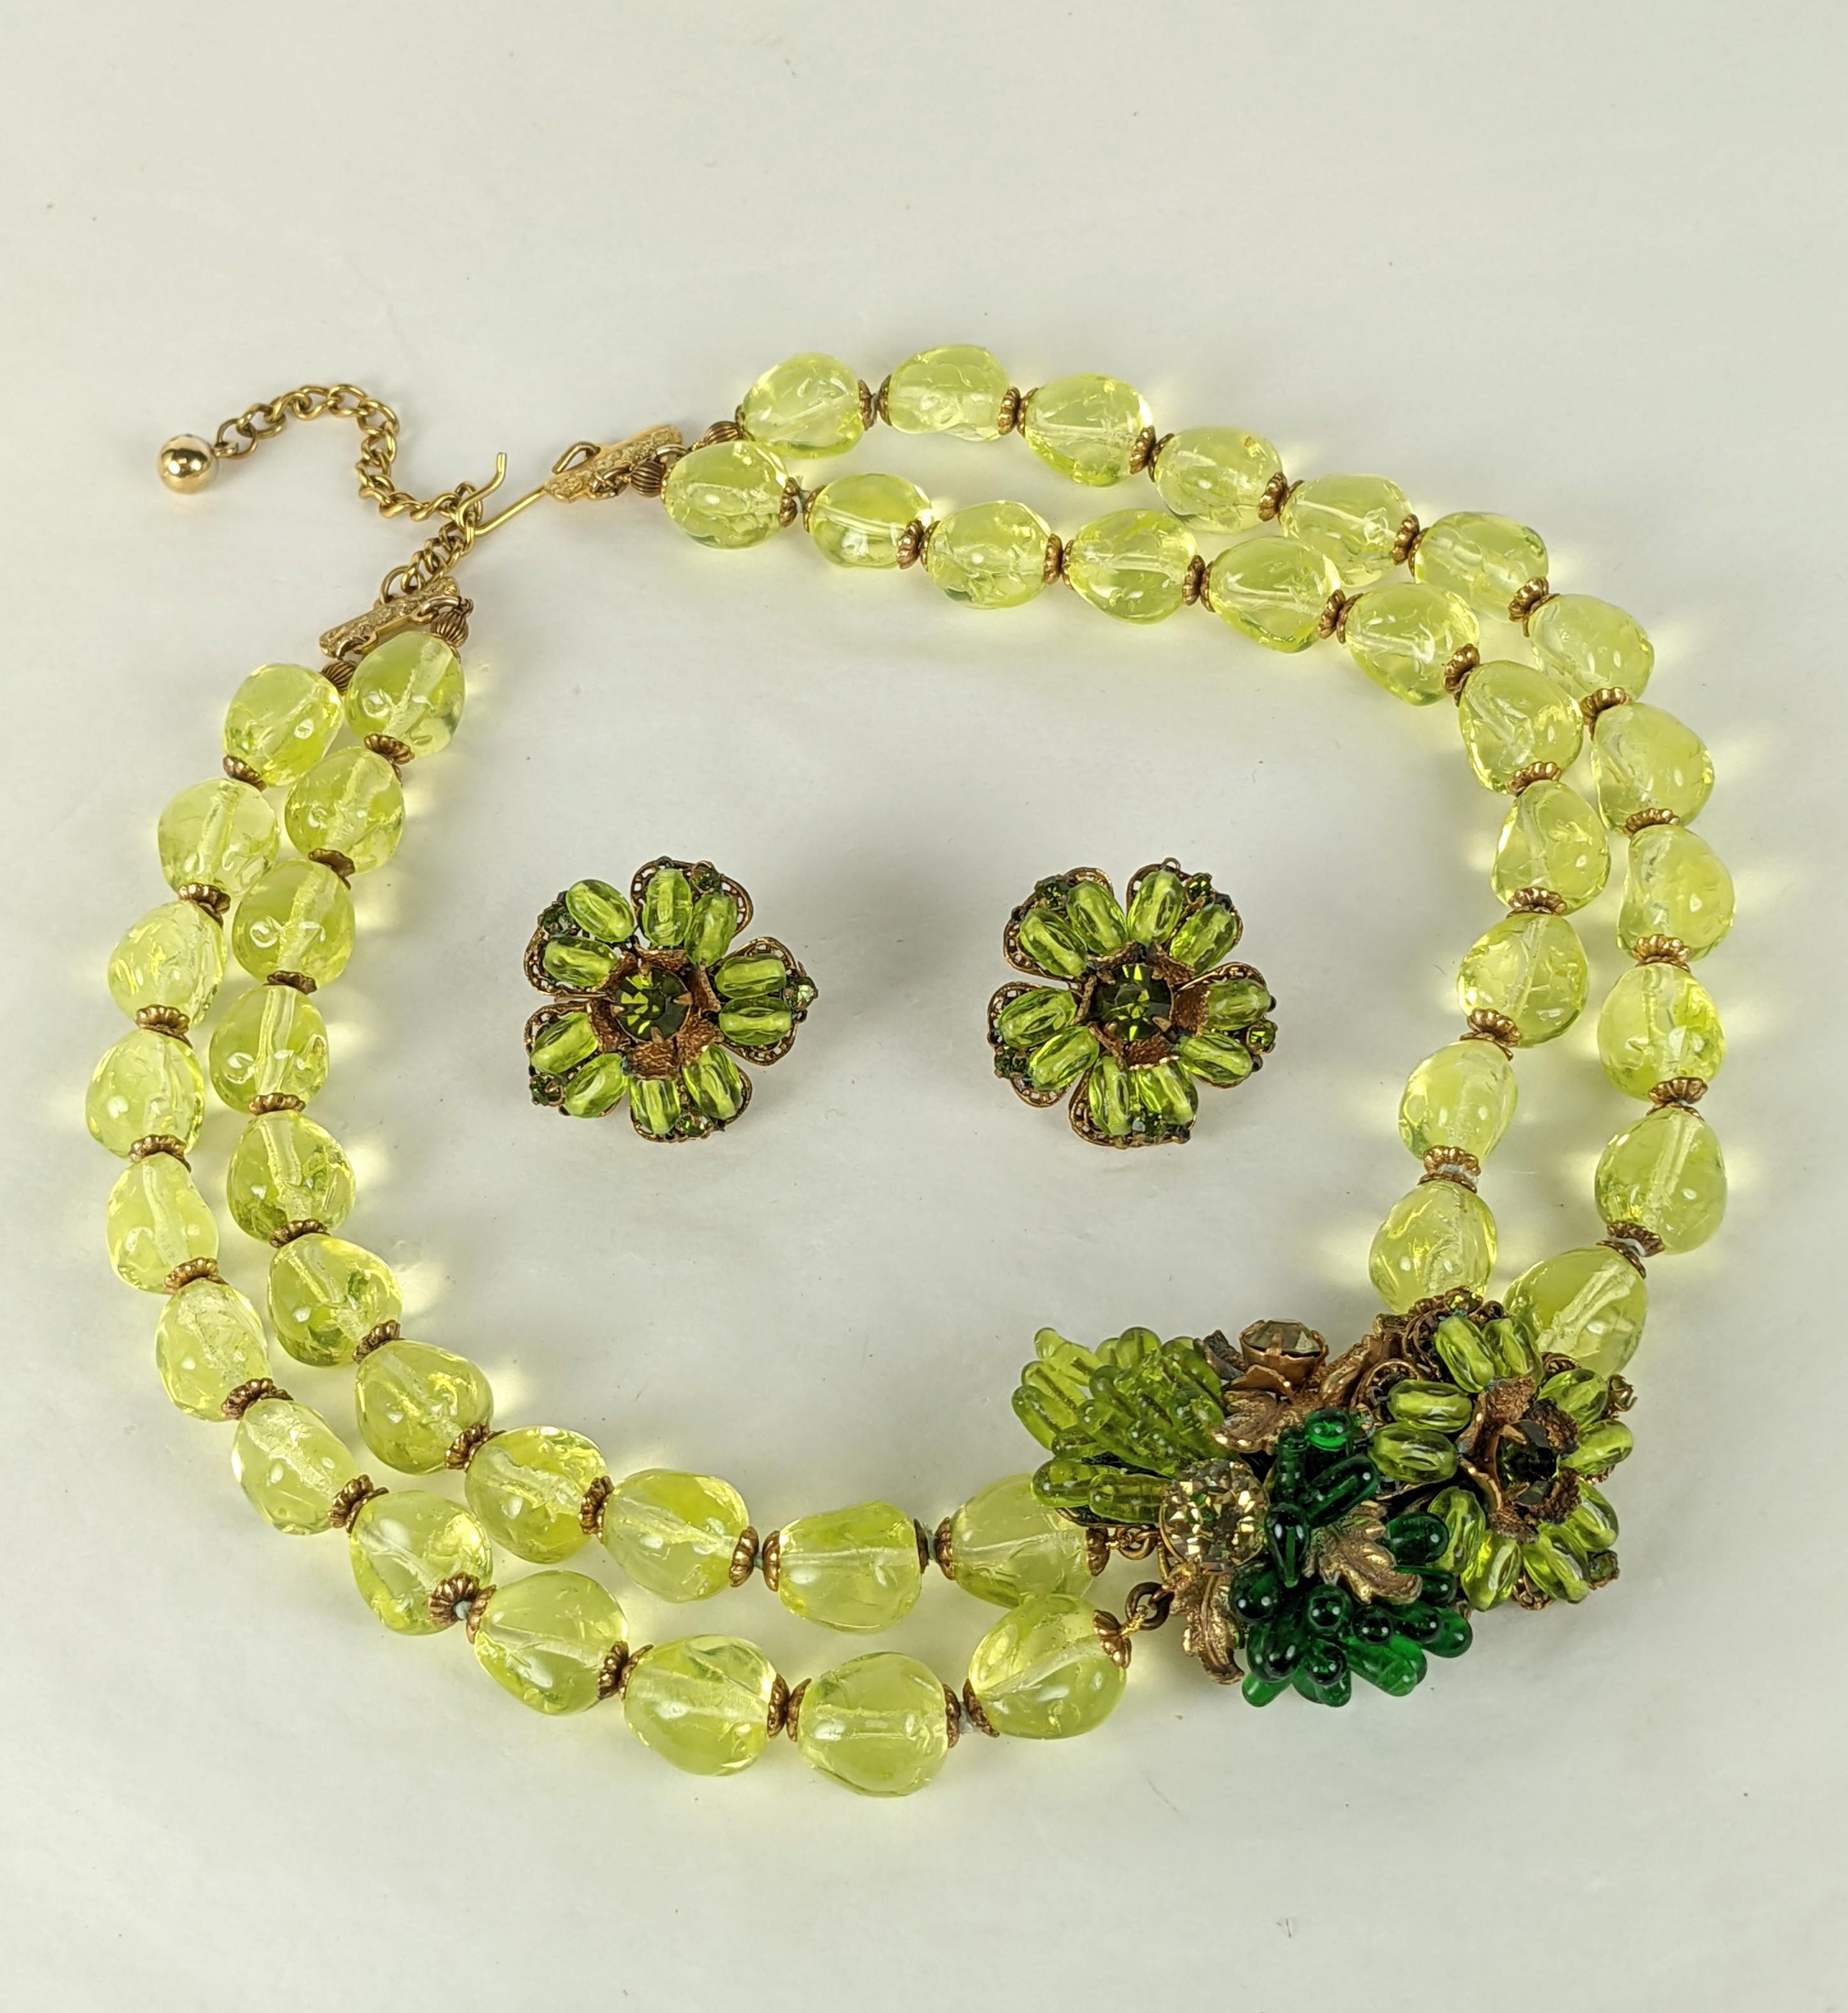 Miriam Haskell Vaseline Glass Pate De Verre Necklace and Earrings from the 1930's. 2 strands of vaseline glass with centerpiece of embroidered flowers, stamen and pastes in varying tones of green hand made pate de verre glass. Matching clip